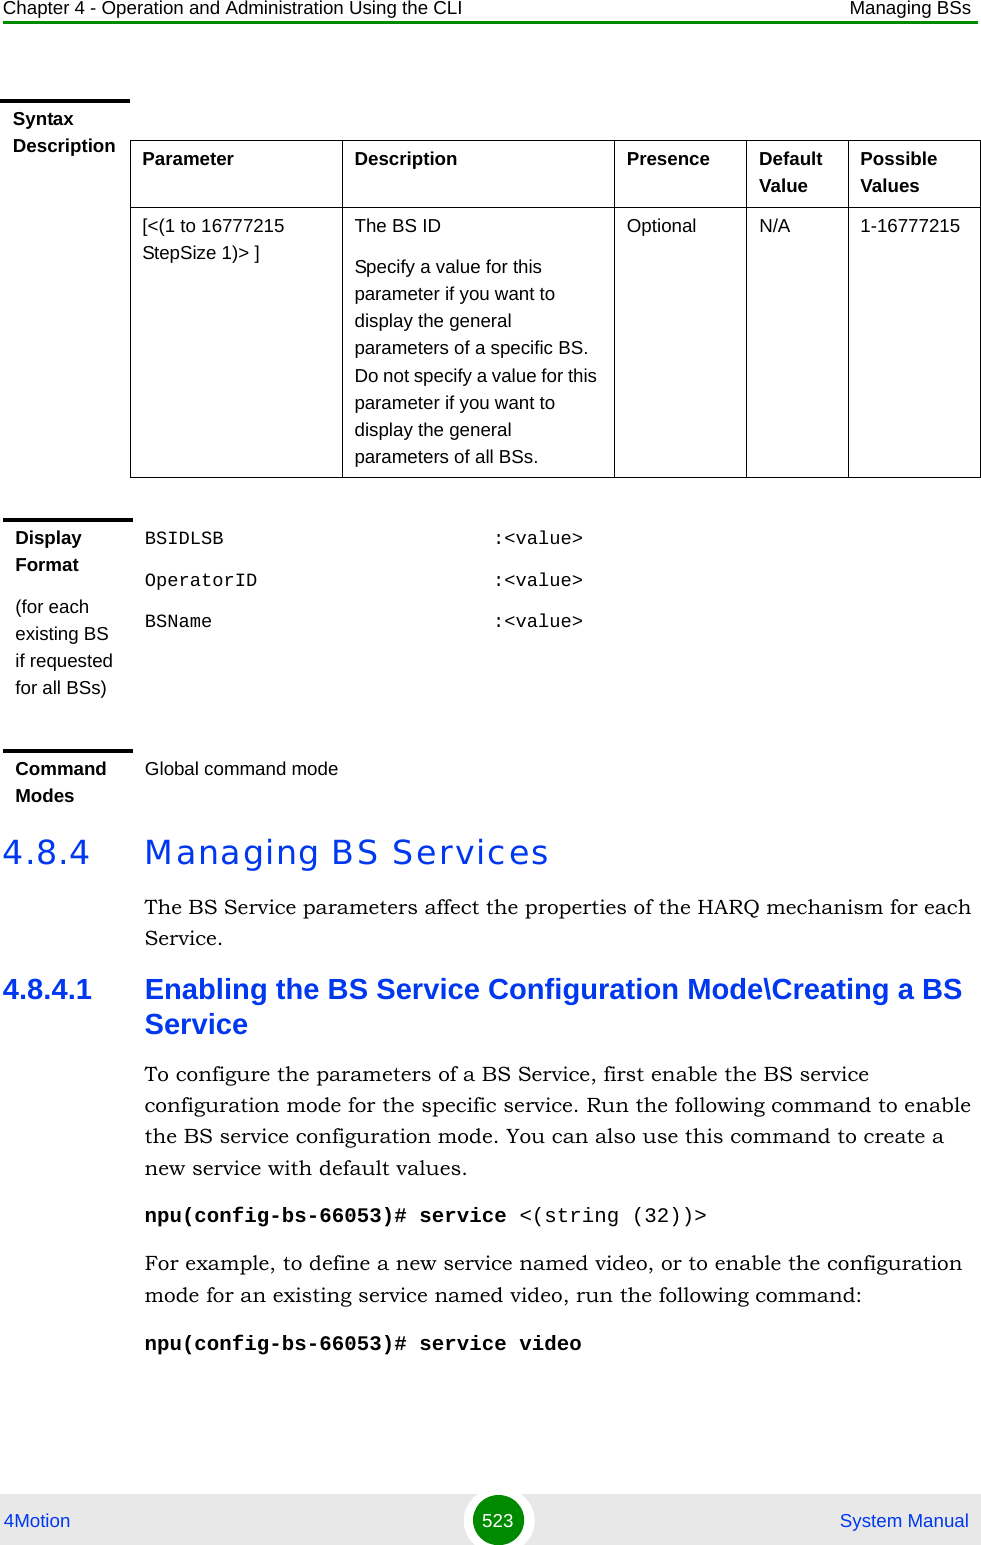 Chapter 4 - Operation and Administration Using the CLI Managing BSs4Motion 523  System Manual4.8.4 Managing BS ServicesThe BS Service parameters affect the properties of the HARQ mechanism for each Service.4.8.4.1 Enabling the BS Service Configuration Mode\Creating a BS ServiceTo configure the parameters of a BS Service, first enable the BS service configuration mode for the specific service. Run the following command to enable the BS service configuration mode. You can also use this command to create a new service with default values. npu(config-bs-66053)# service &lt;(string (32))&gt;For example, to define a new service named video, or to enable the configuration mode for an existing service named video, run the following command:npu(config-bs-66053)# service videoSyntax Description Parameter Description Presence Default ValuePossible Values[&lt;(1 to 16777215 StepSize 1)&gt; ]The BS ID Specify a value for this parameter if you want to display the general parameters of a specific BS. Do not specify a value for this parameter if you want to display the general parameters of all BSs.Optional N/A 1-16777215Display Format(for each existing BS if requested for all BSs)BSIDLSB                        :&lt;value&gt;OperatorID                     :&lt;value&gt;BSName                         :&lt;value&gt;Command ModesGlobal command mode